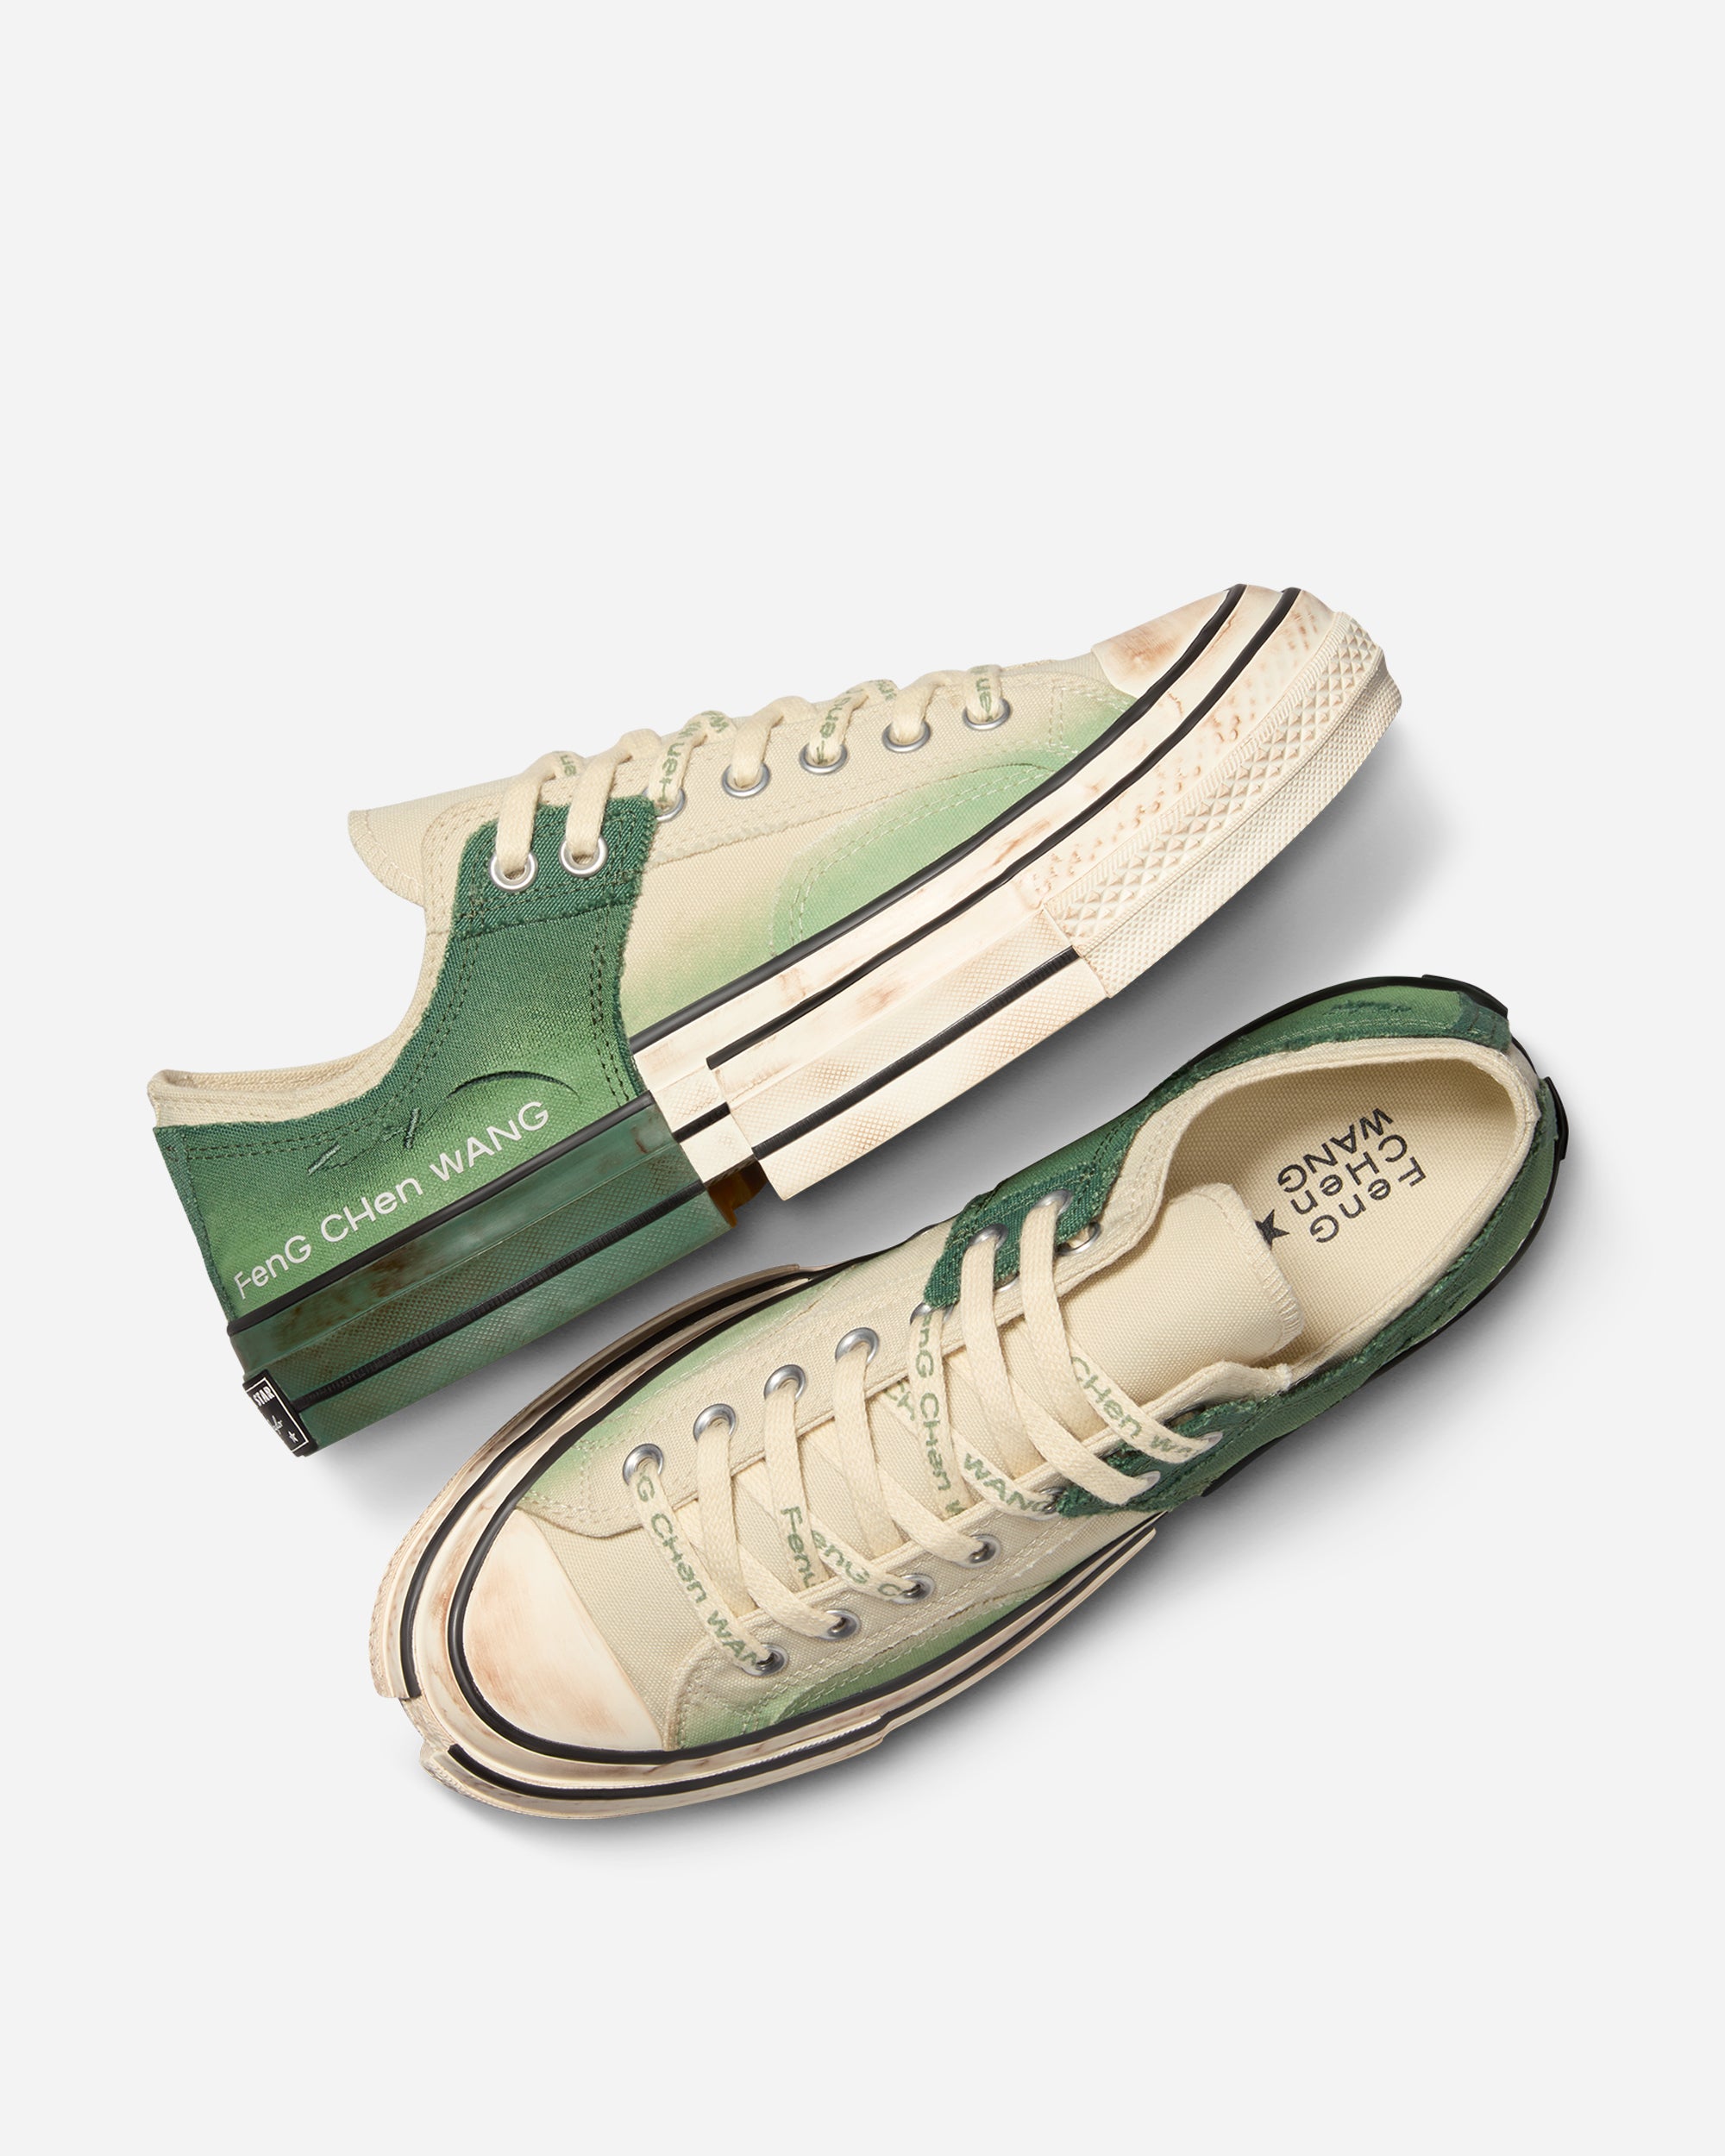 CONVERSE Converse x Feng Chen Wang Chuck 70 2-in-1 Natural Ivory/Myrtle/Egret A07636C